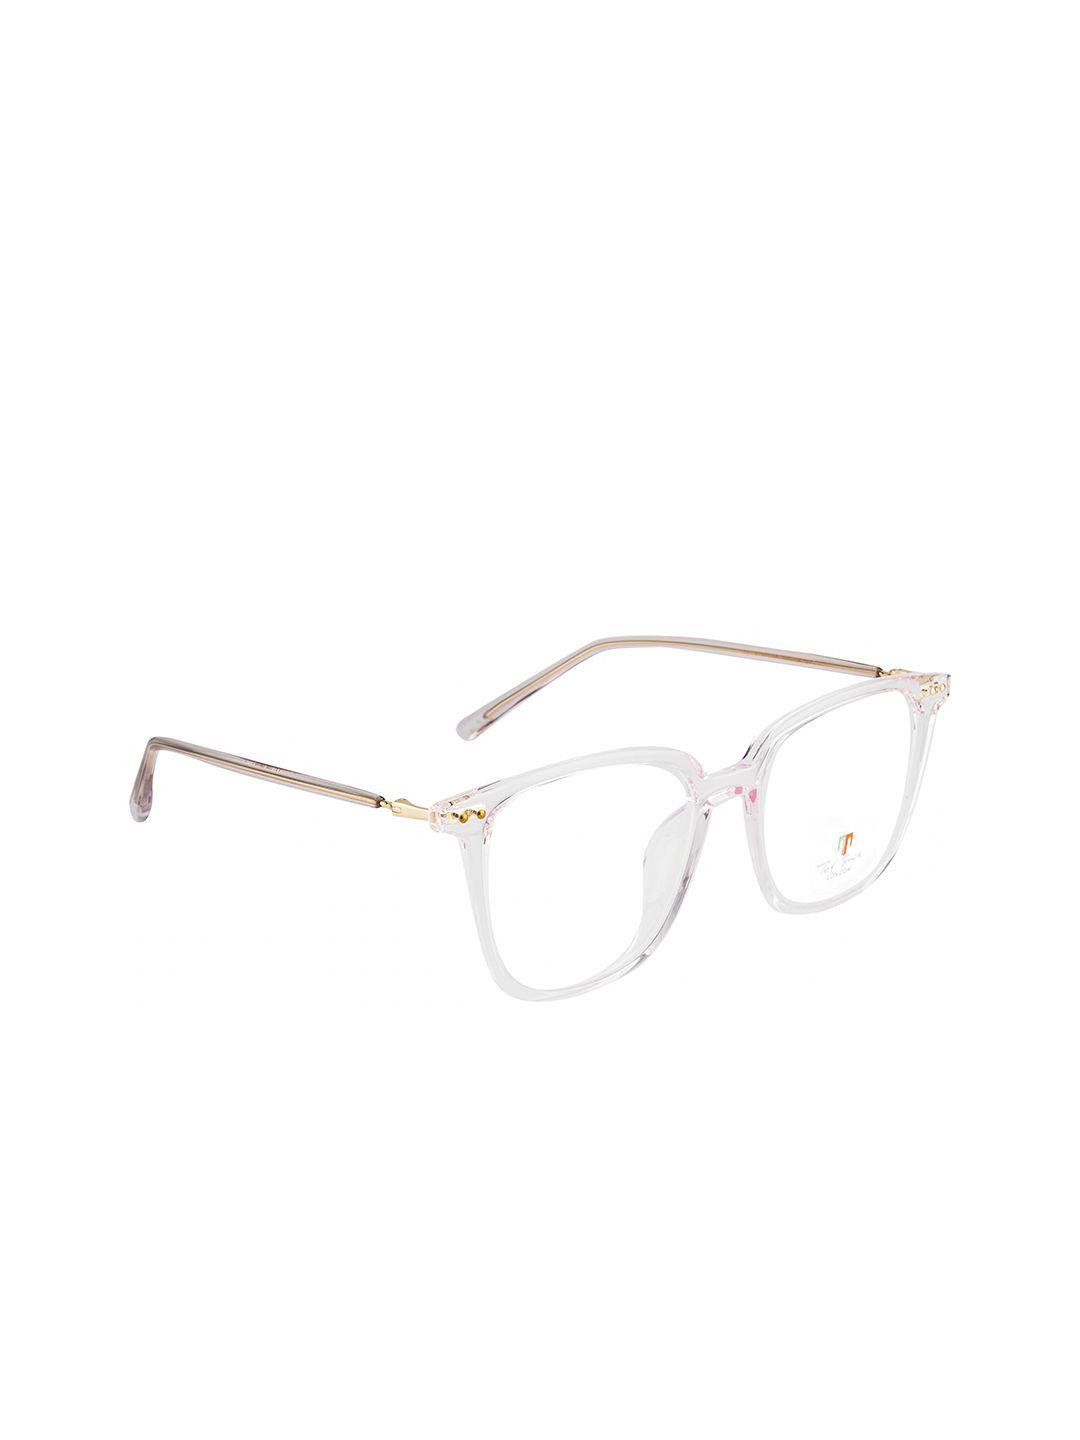 ted smith unisex pink & gold-toned full rim square frames ts-11018_pink